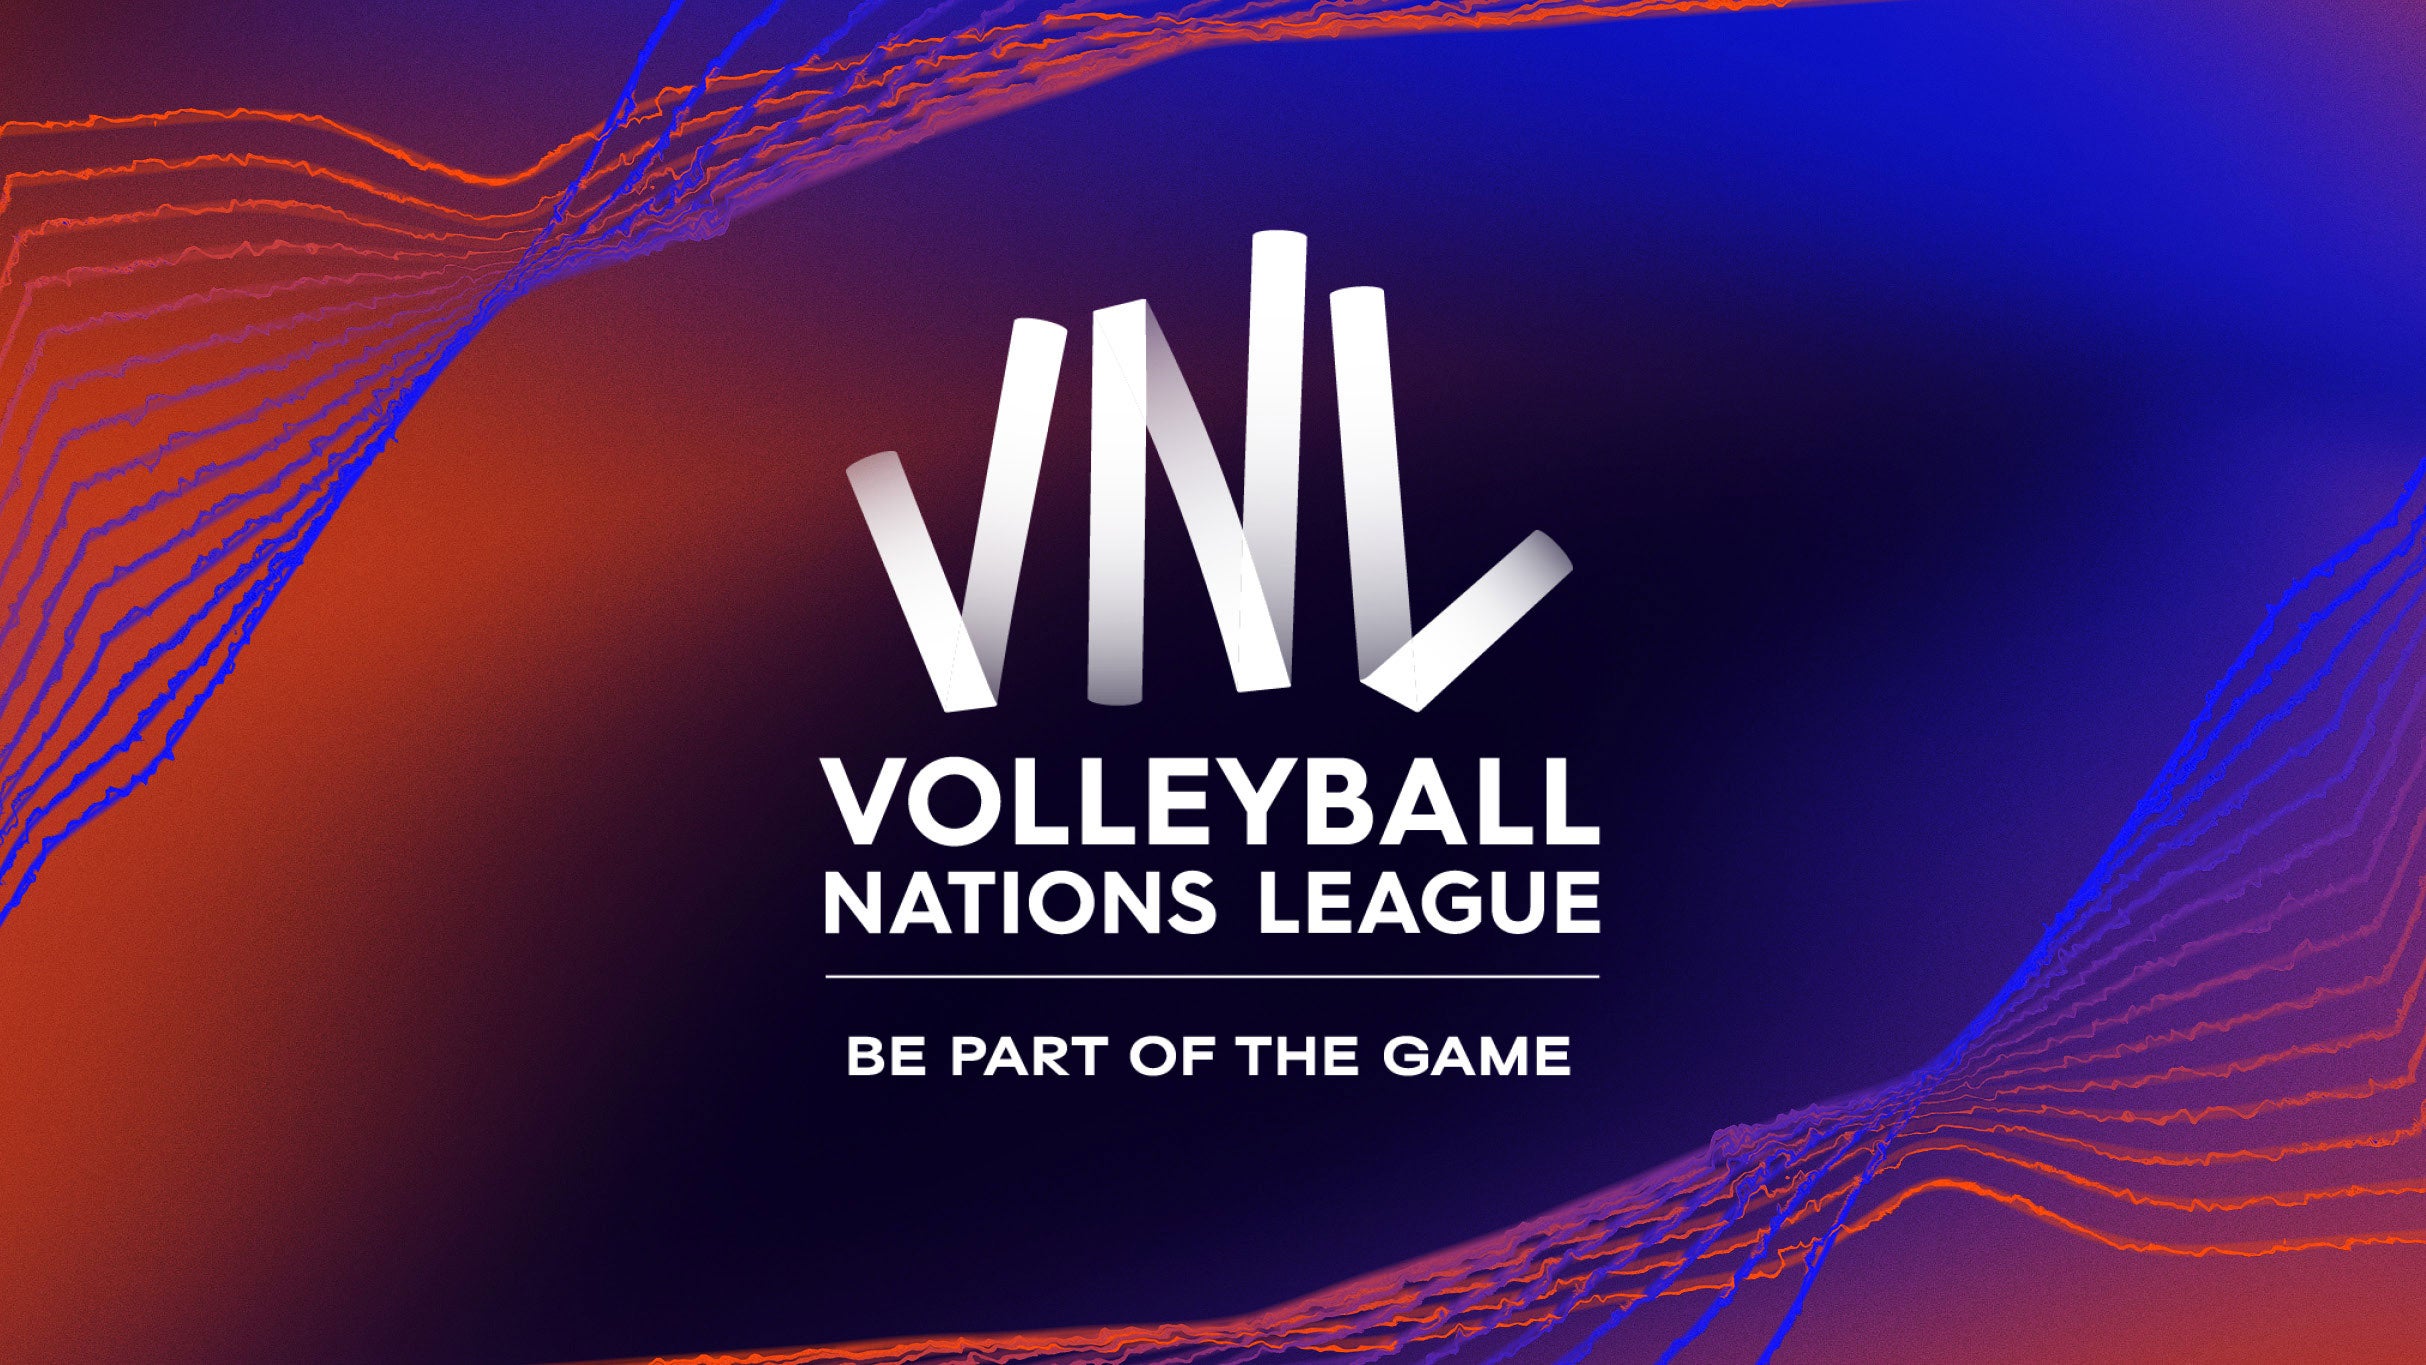 Volleyball Nations League - Match Day 4 in Ottawa promo photo for Volleyball Canada presale offer code